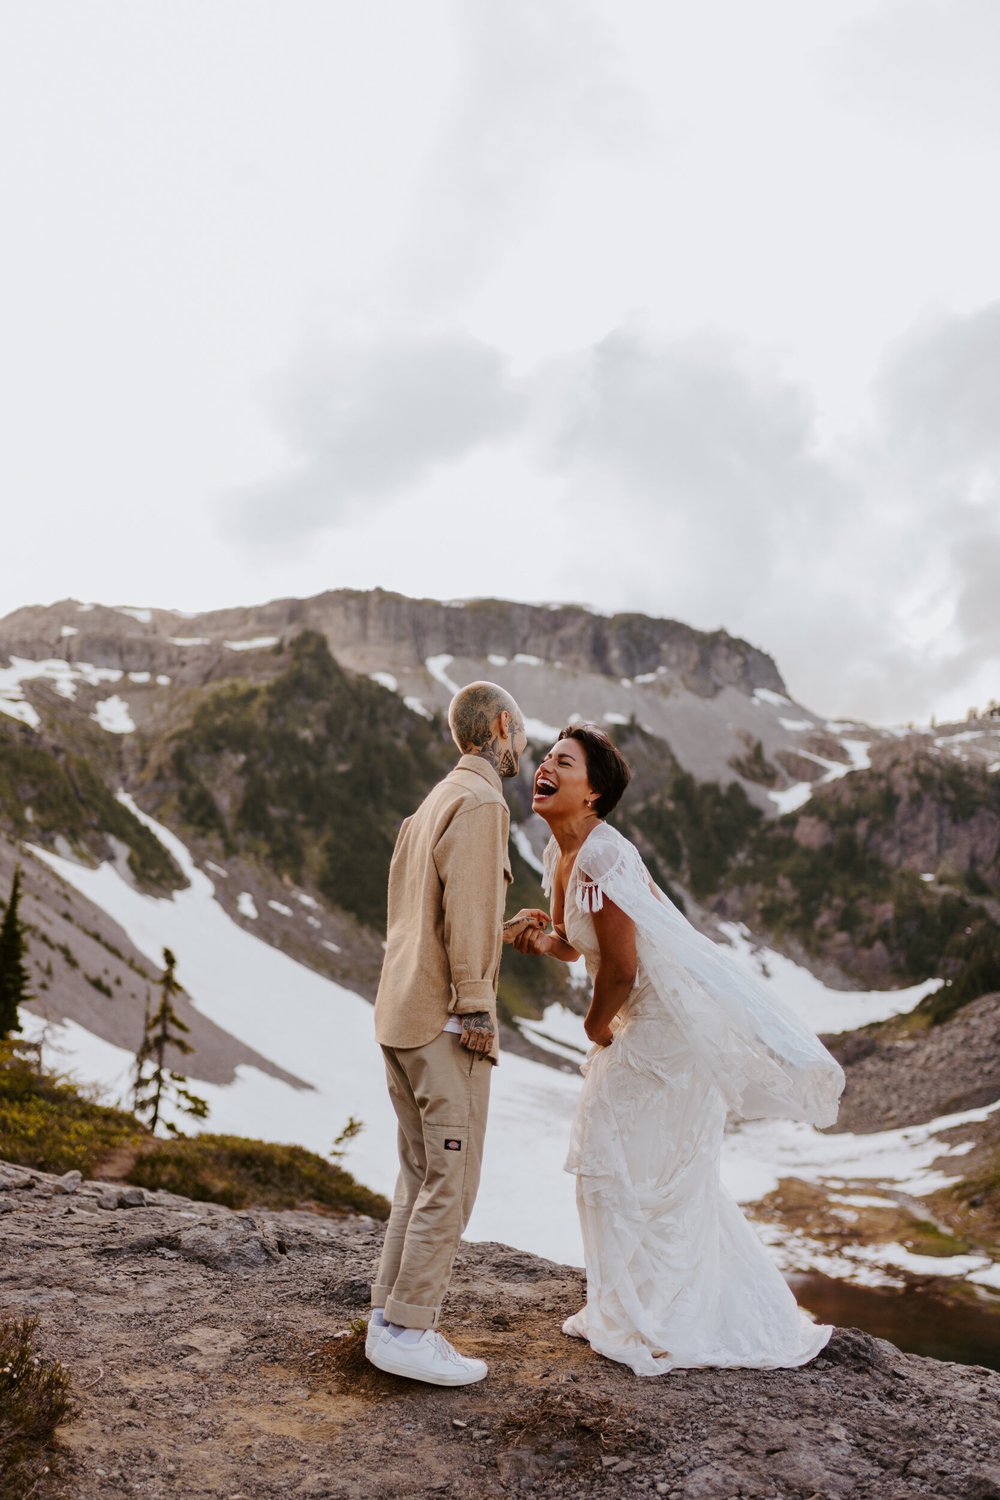 North Cascades National Park Elopement at Bagley Lakes, Mt.Baker Elopement, Artist Point Elopement, Pacific Northwest Elopement, Lesbian Couple, Photography by Tida Svy | www.tidasvy.com